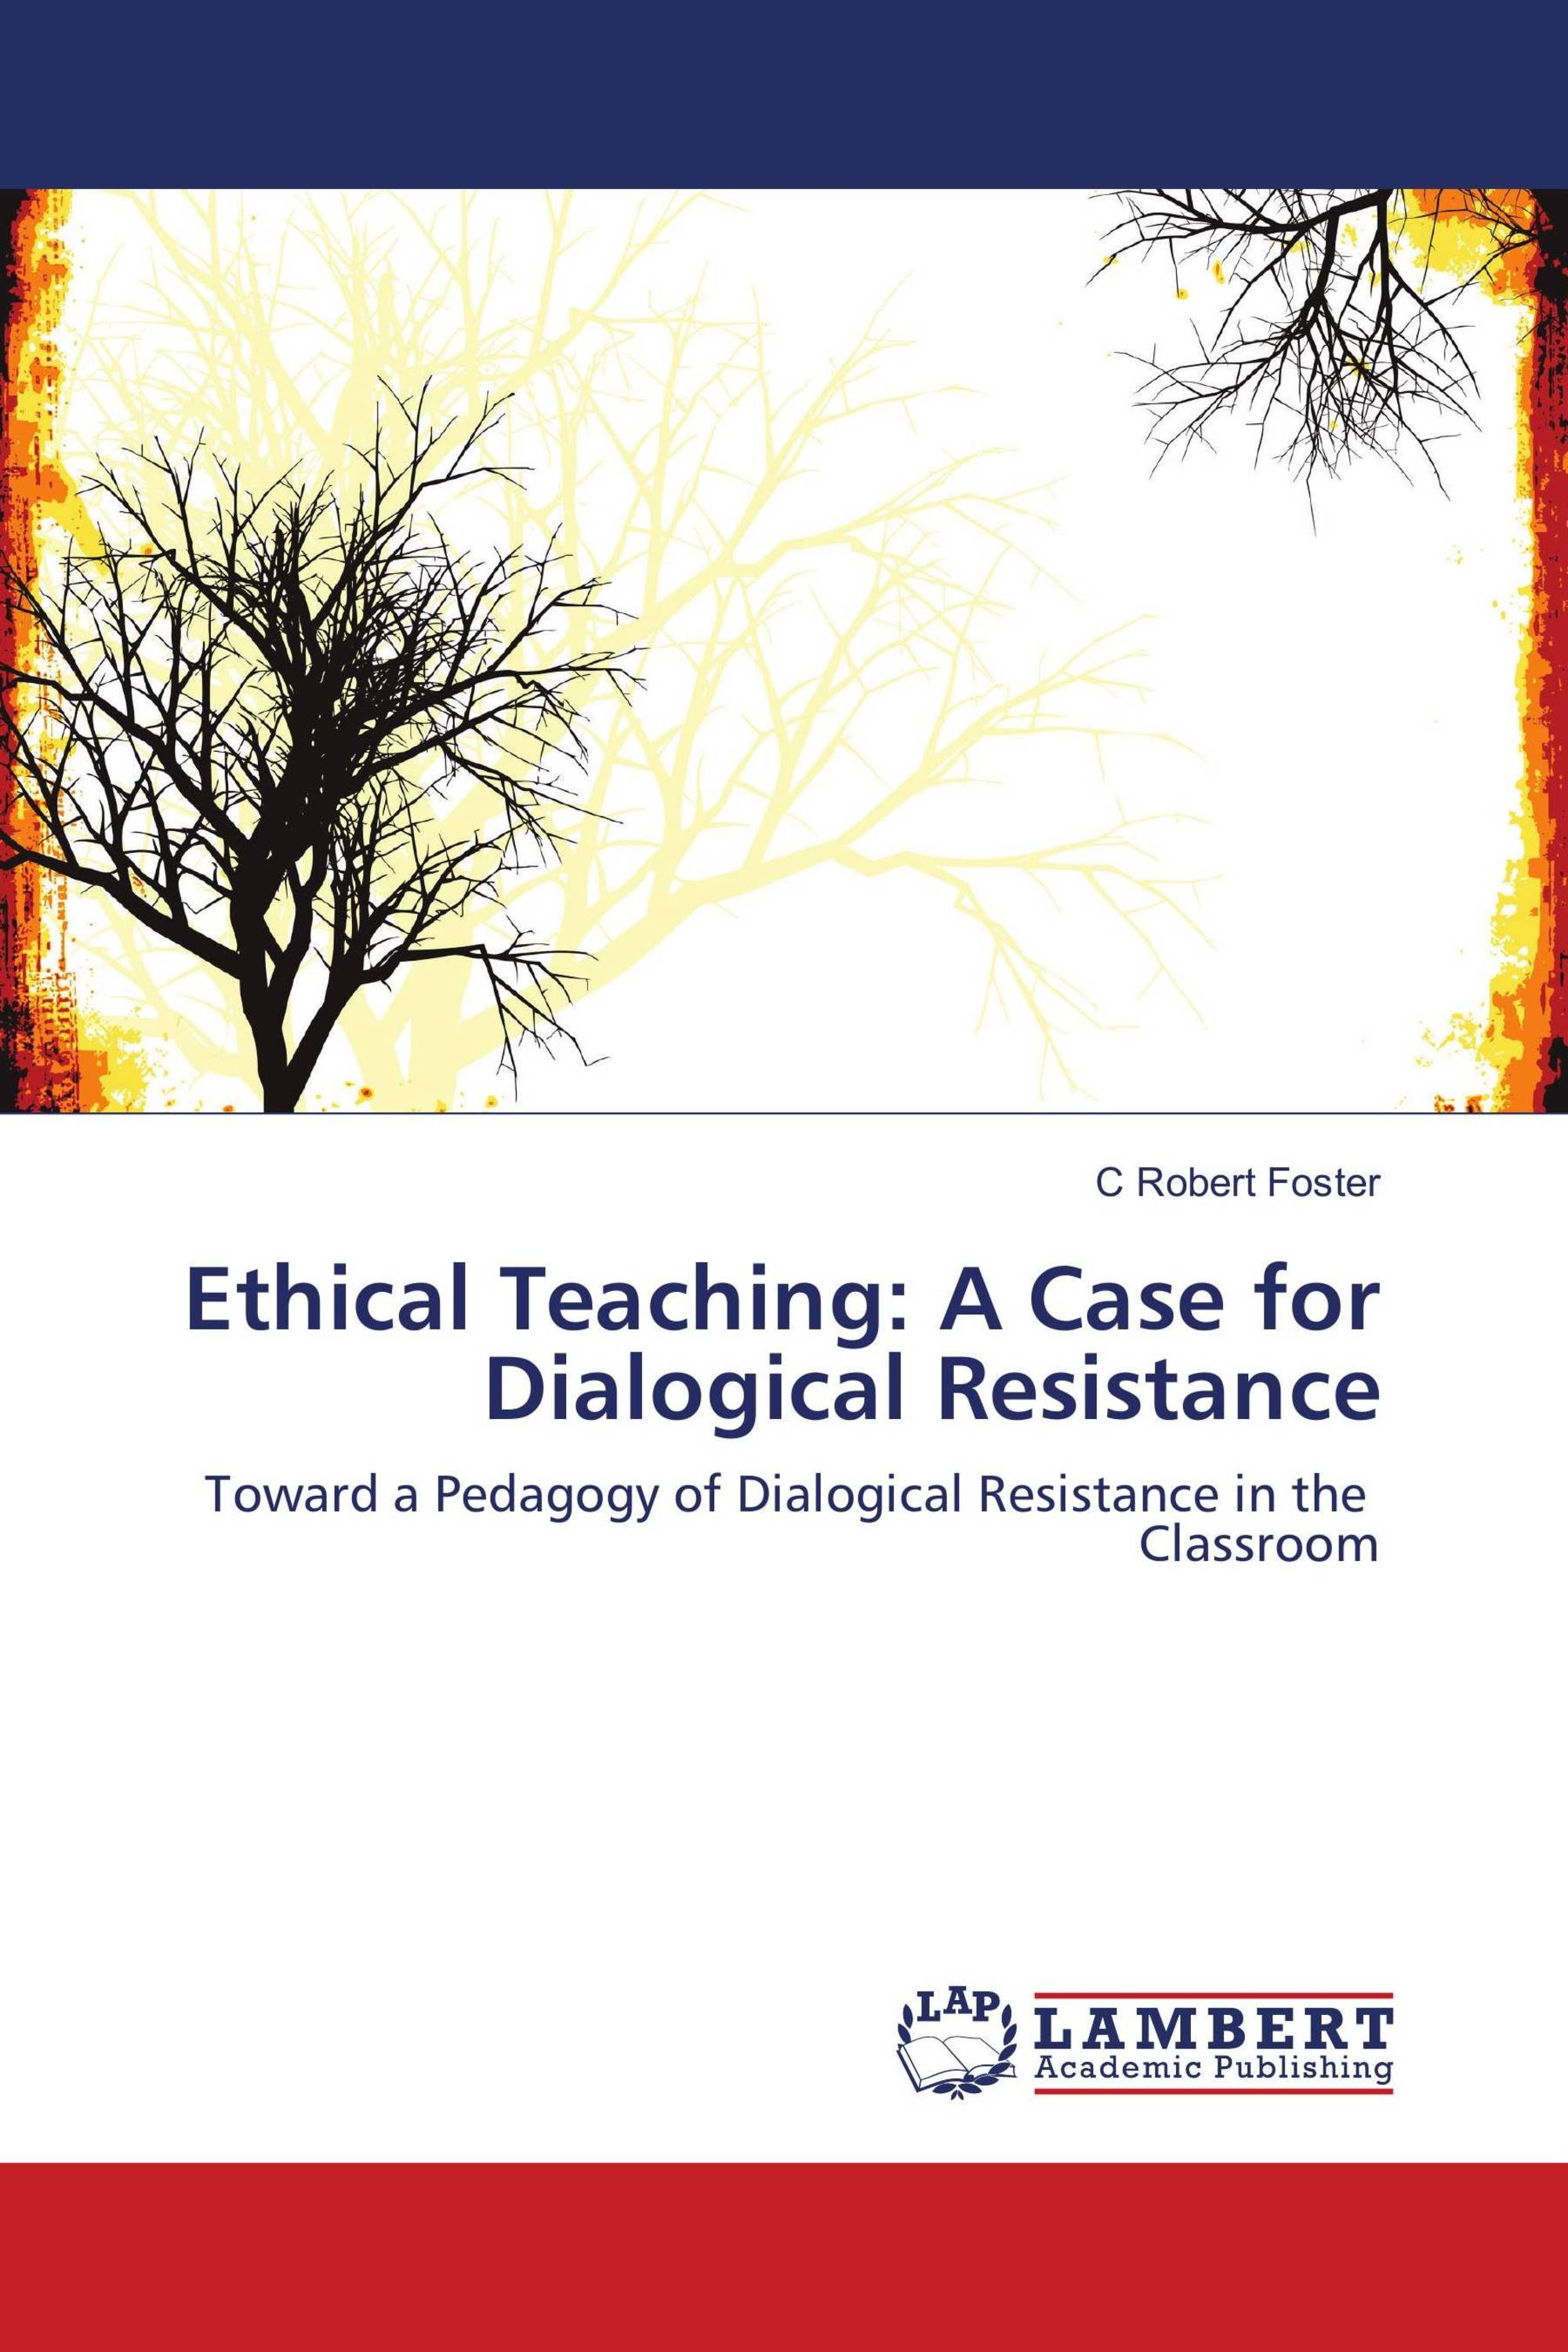 Ethical Teaching: A Case for Dialogical Resistance